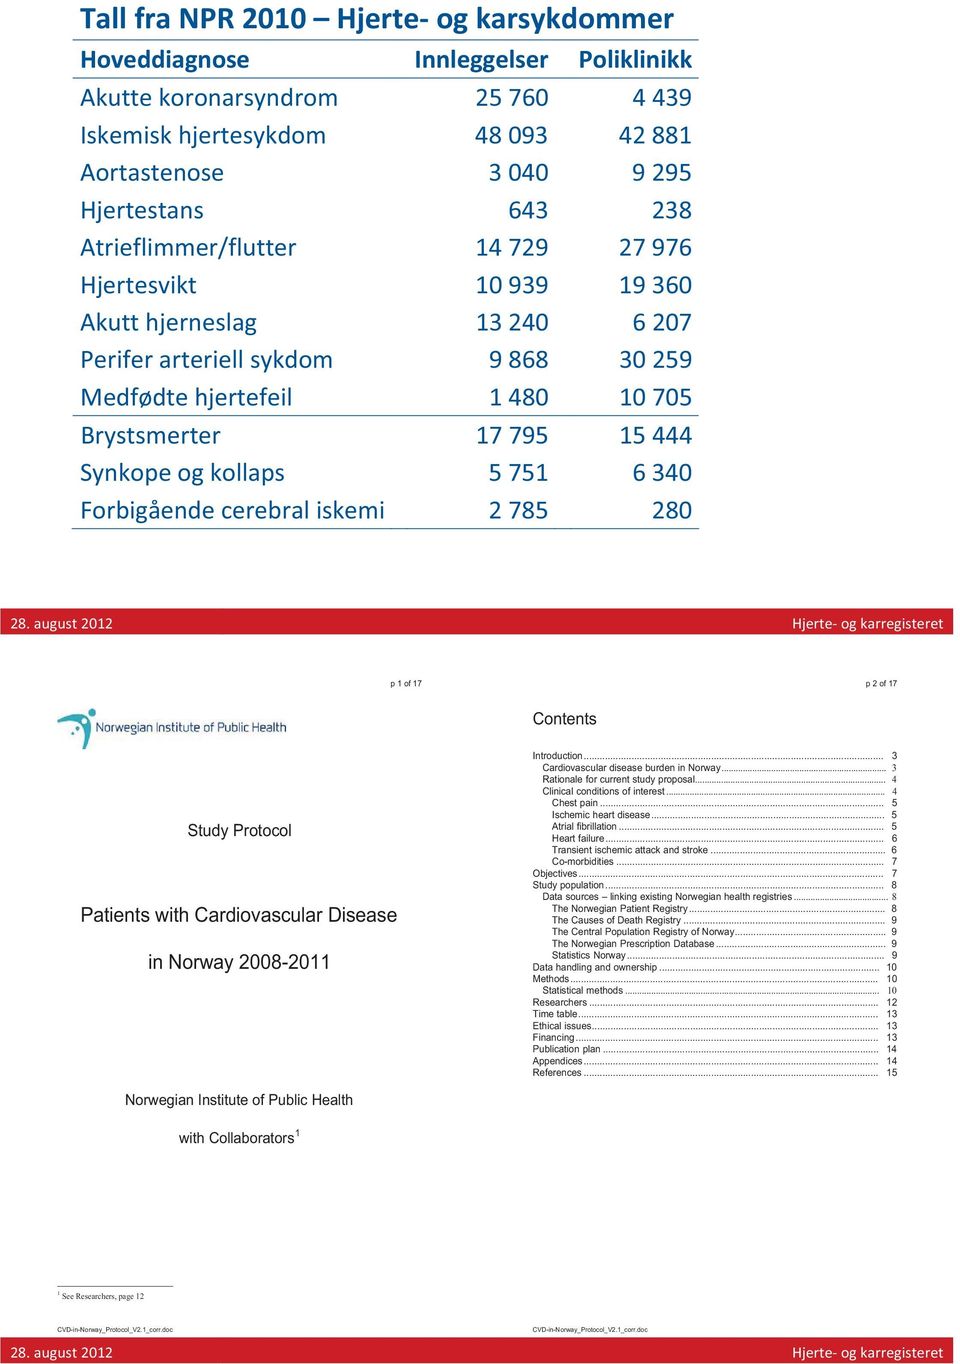 kollaps 5 751 6 340 Forbigående cerebral iskemi 2 785 280 p 1 of 17 p 2 of 17 Contents Study Protocol Patients with Cardiovascular Disease in Norway 2008-2011 Introduction.